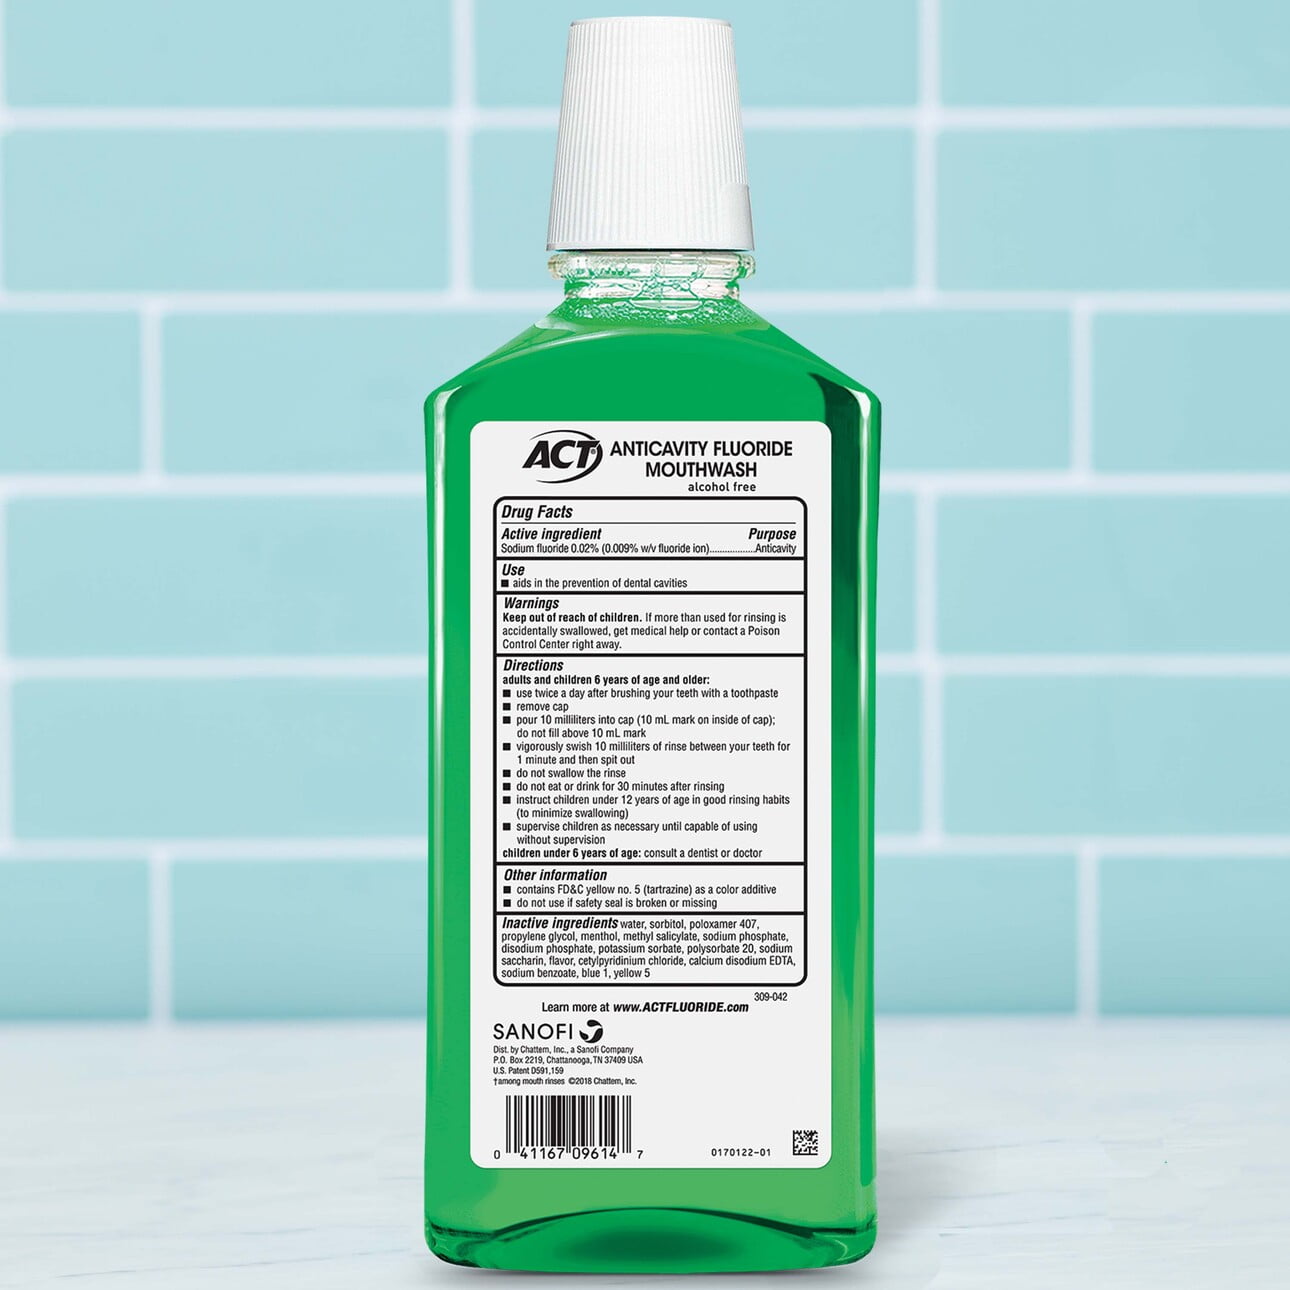 ACT Total Care Anticavity Fluoride Mouthwash, Alcohol Free Mouth Rinse for Adults, Fresh Mint, 33.8 fl oz - image 3 of 11